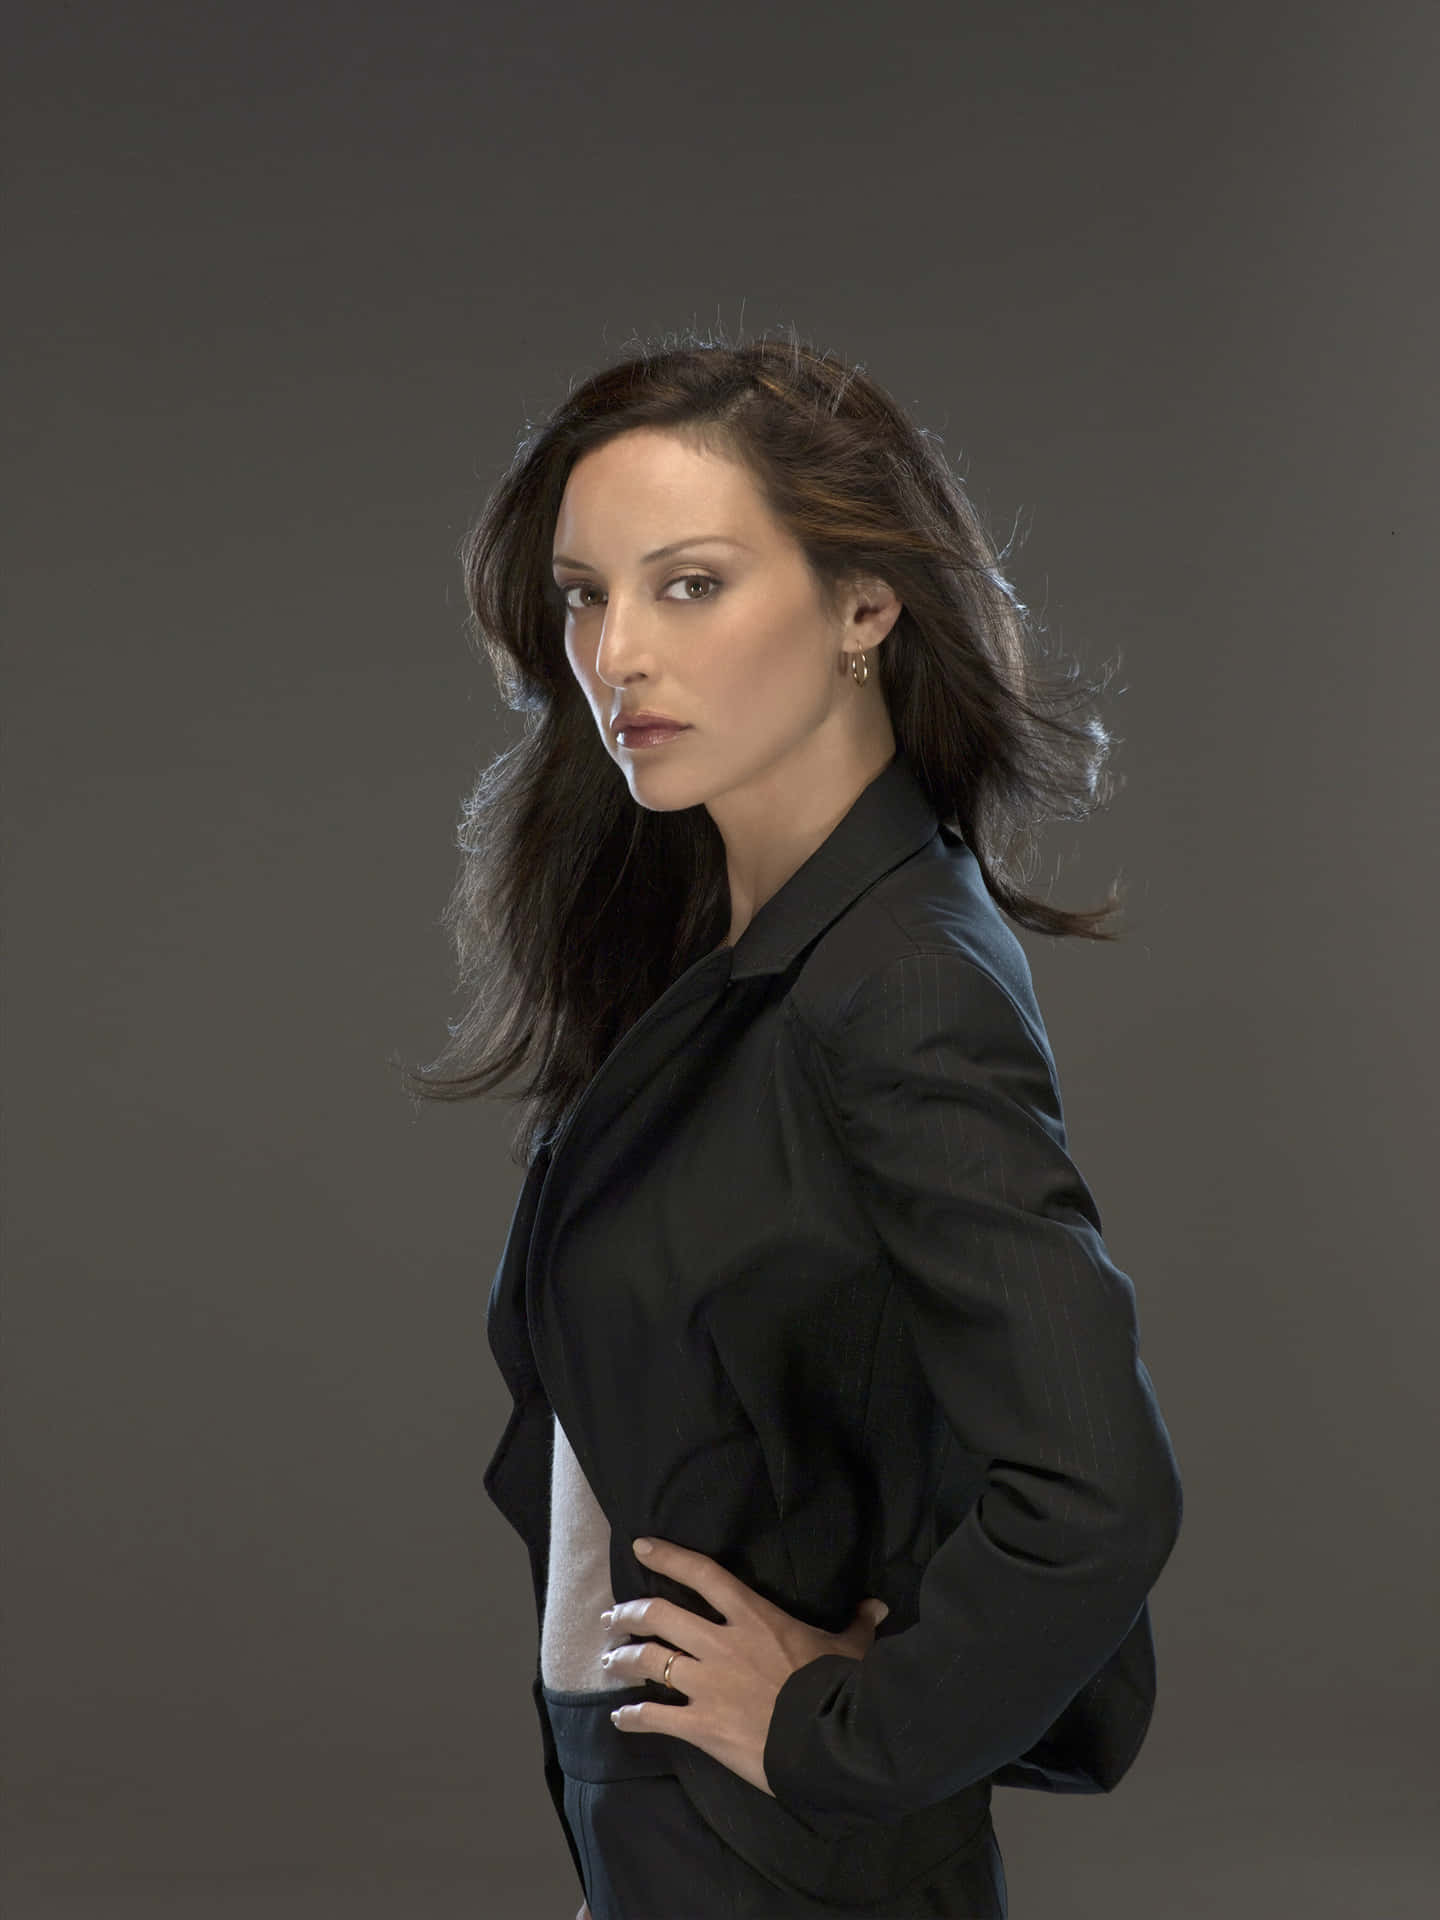 Paget Brewster posing for a portrait Wallpaper